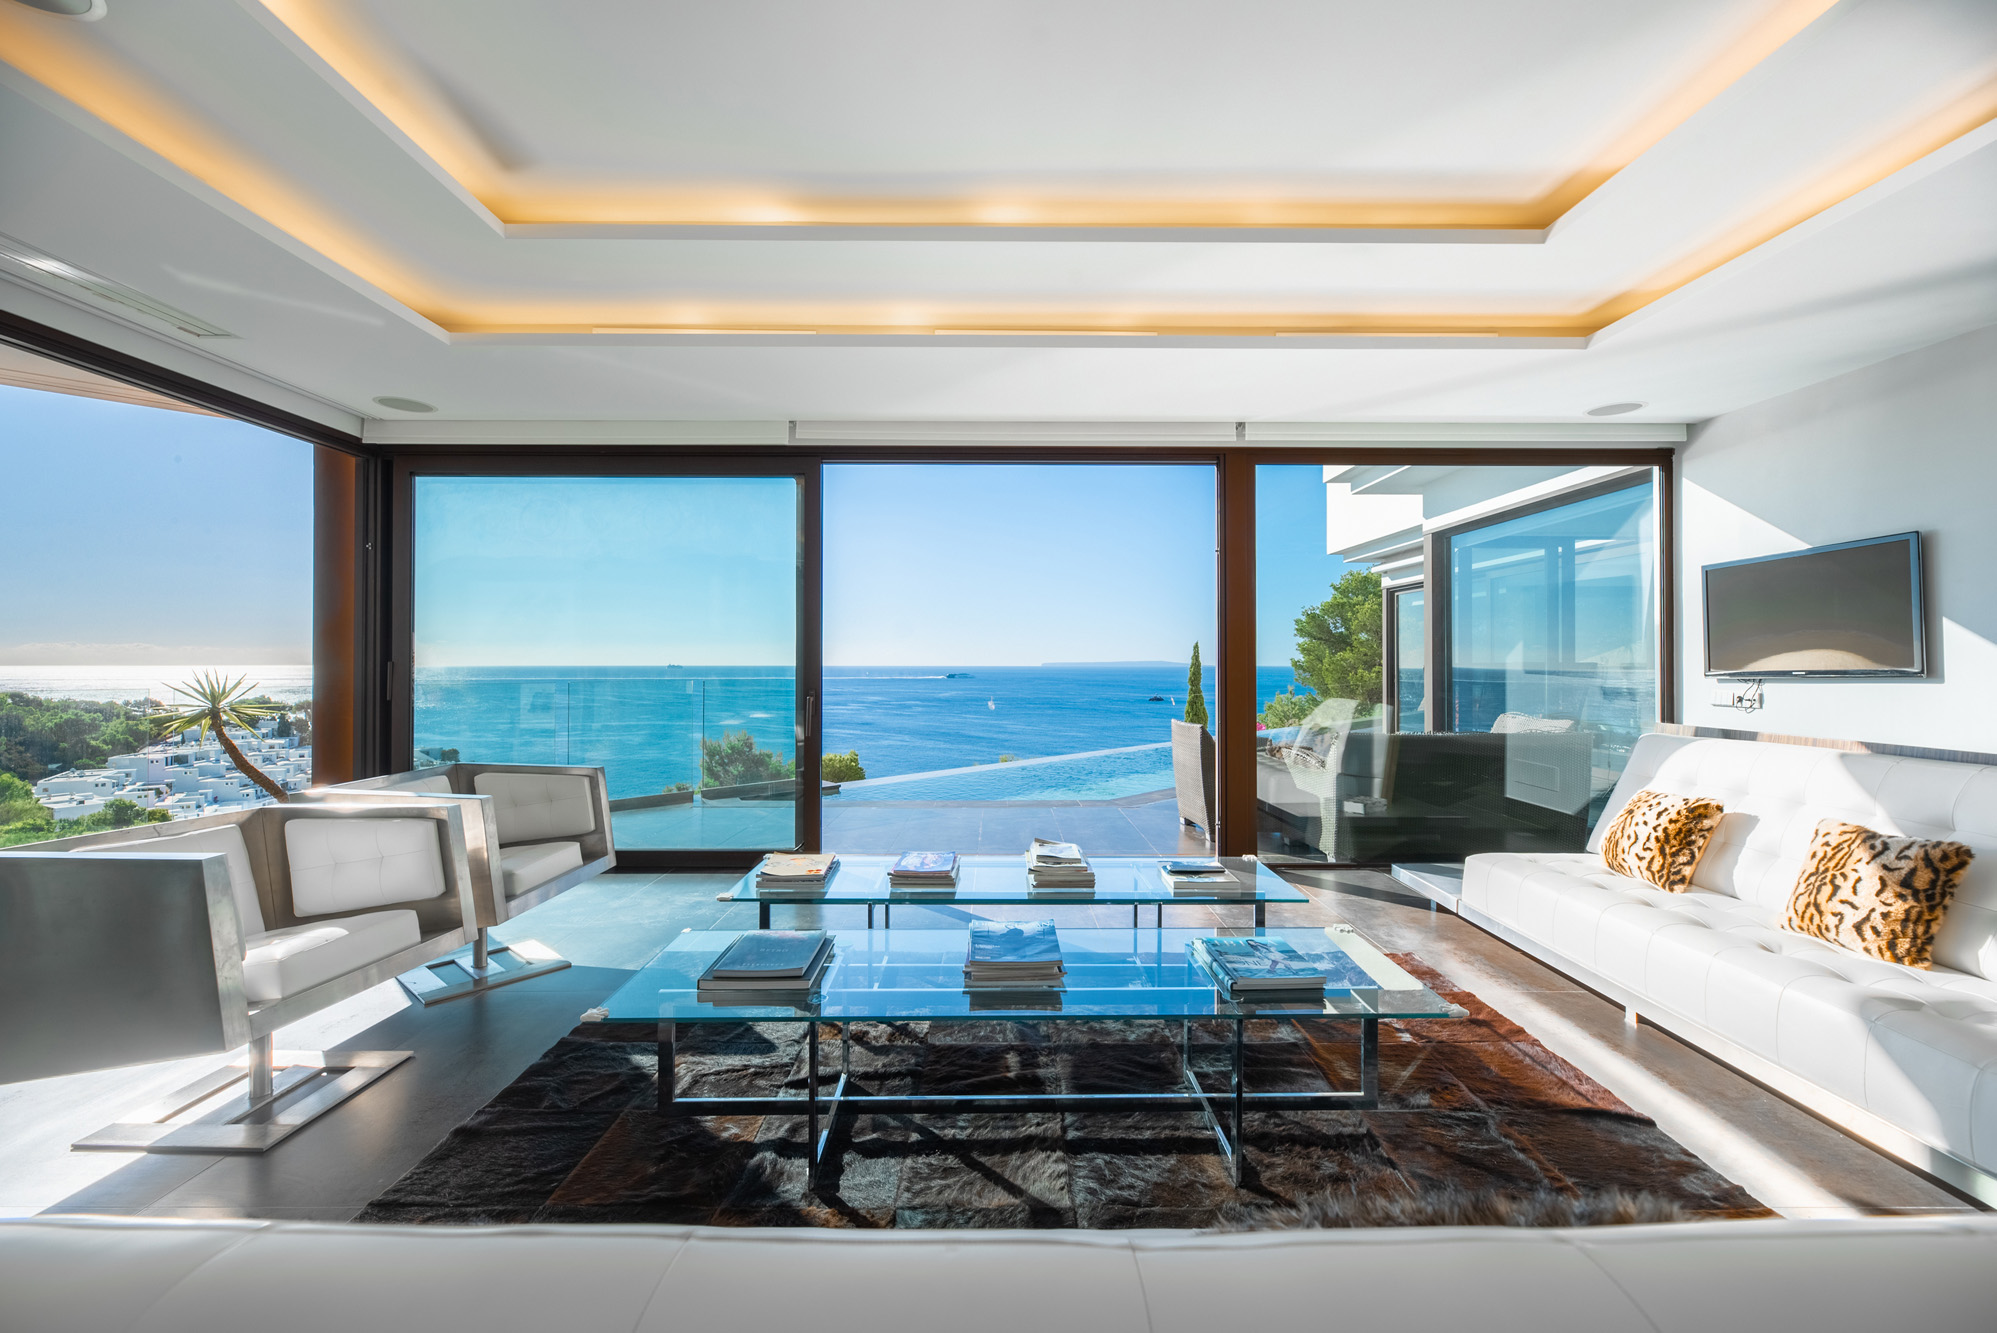 Villa for sale in Ibiza with a stylish contemporary living room featuring concealed strip lighting and panoramic sea views